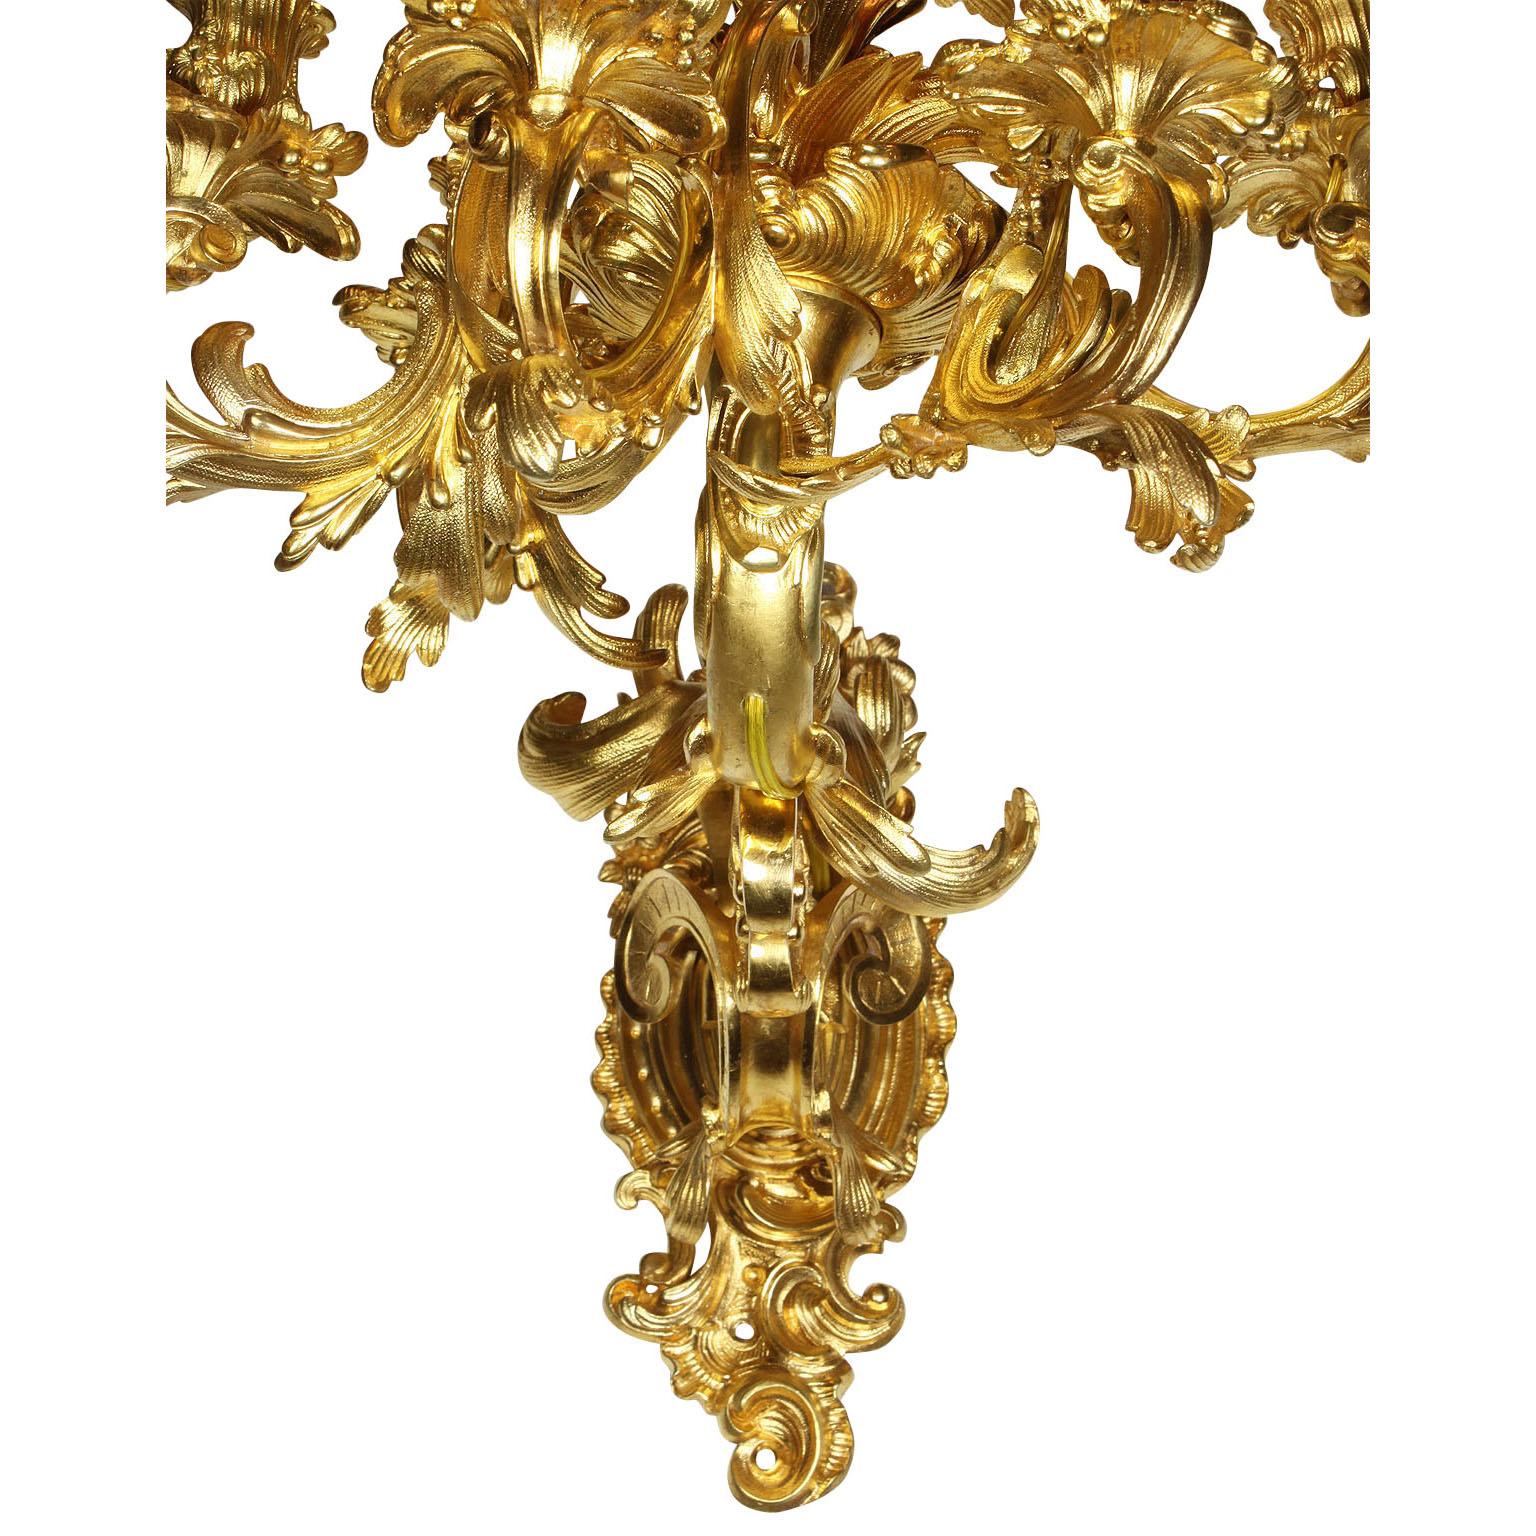 French 19th Century Louis XV Style Rococo Gilt-Bronze Wall Lights Sconces, Pair For Sale 5